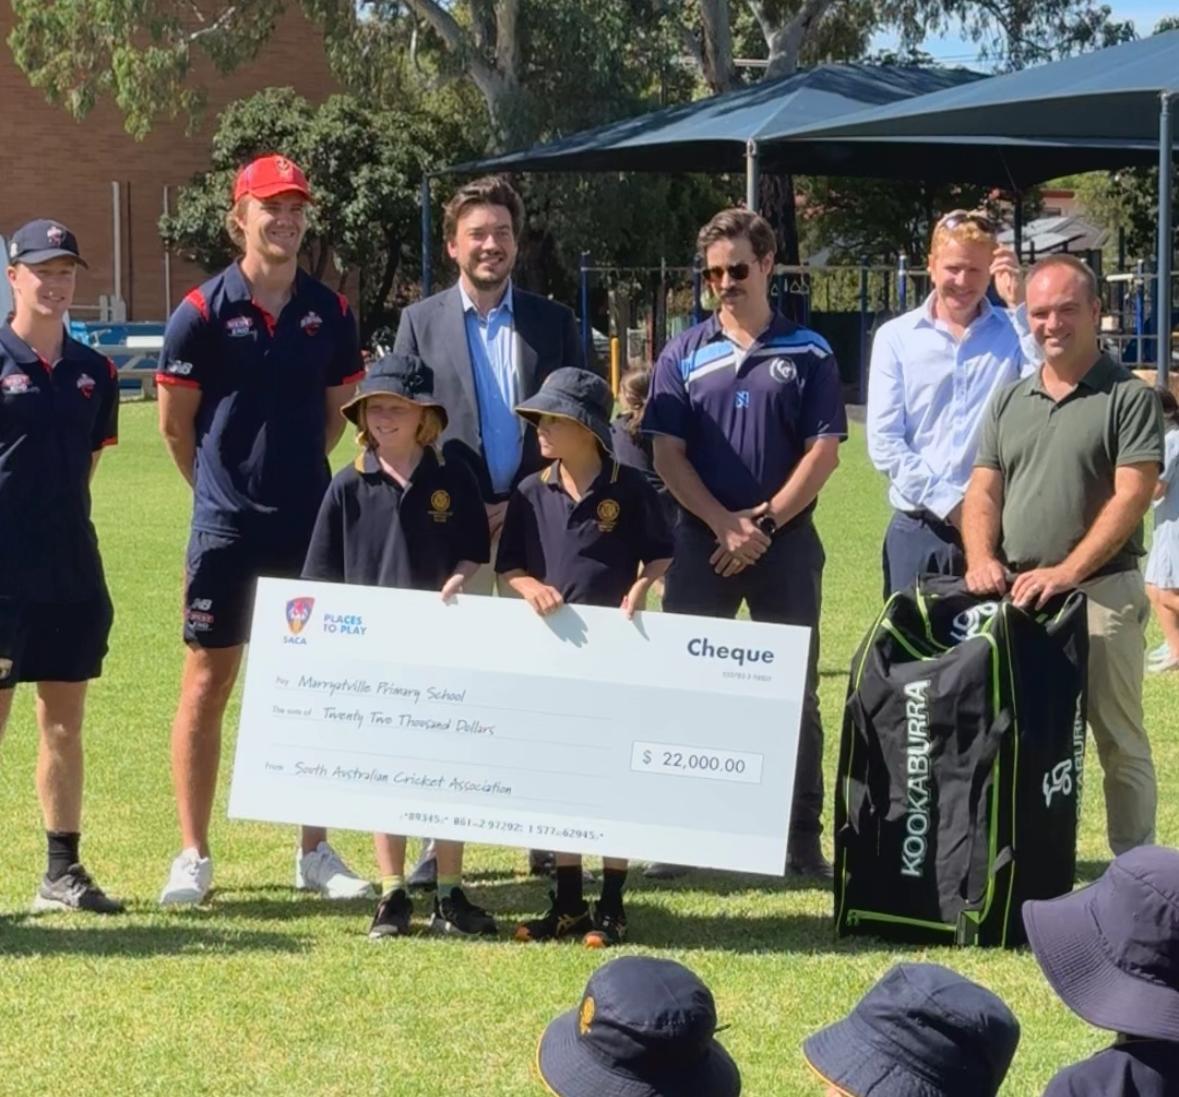 A big cheque for a new cricket pitch at Marryatville Primary School!